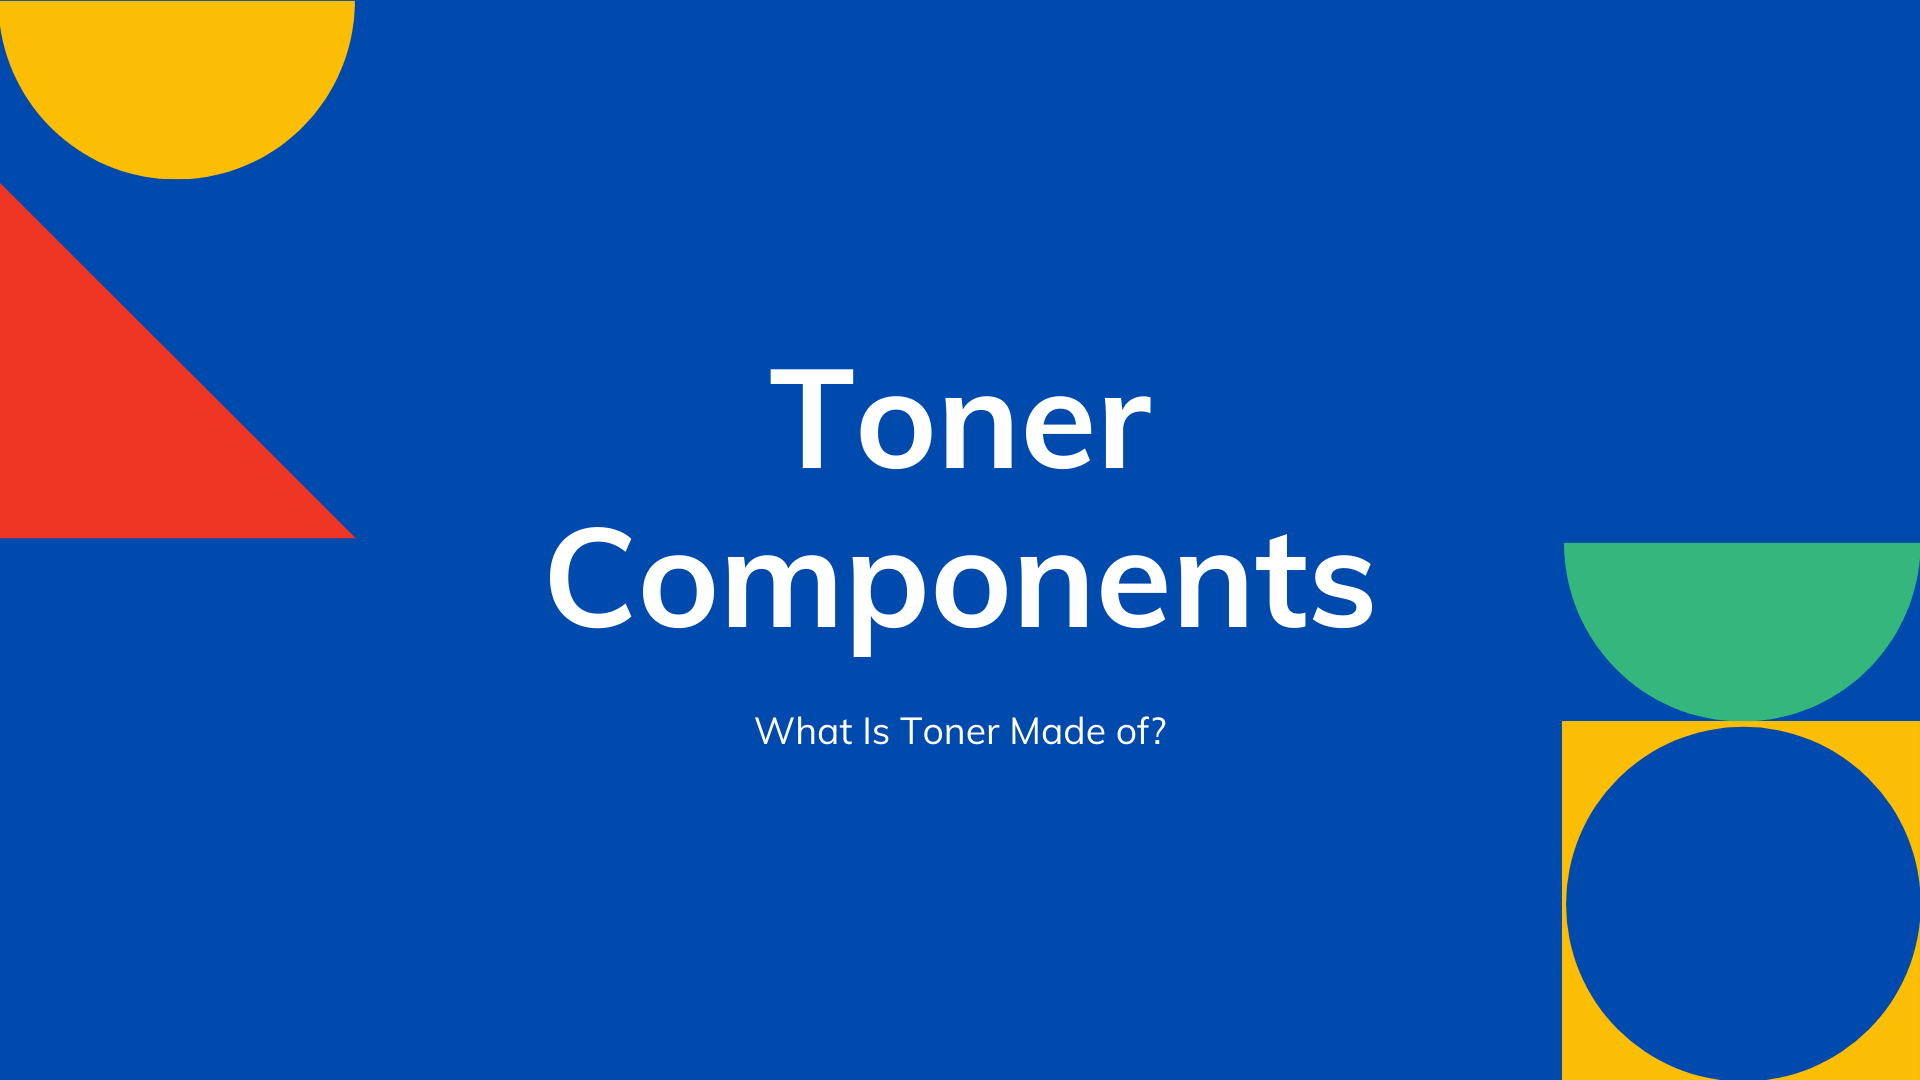 What Is Toner Made Of